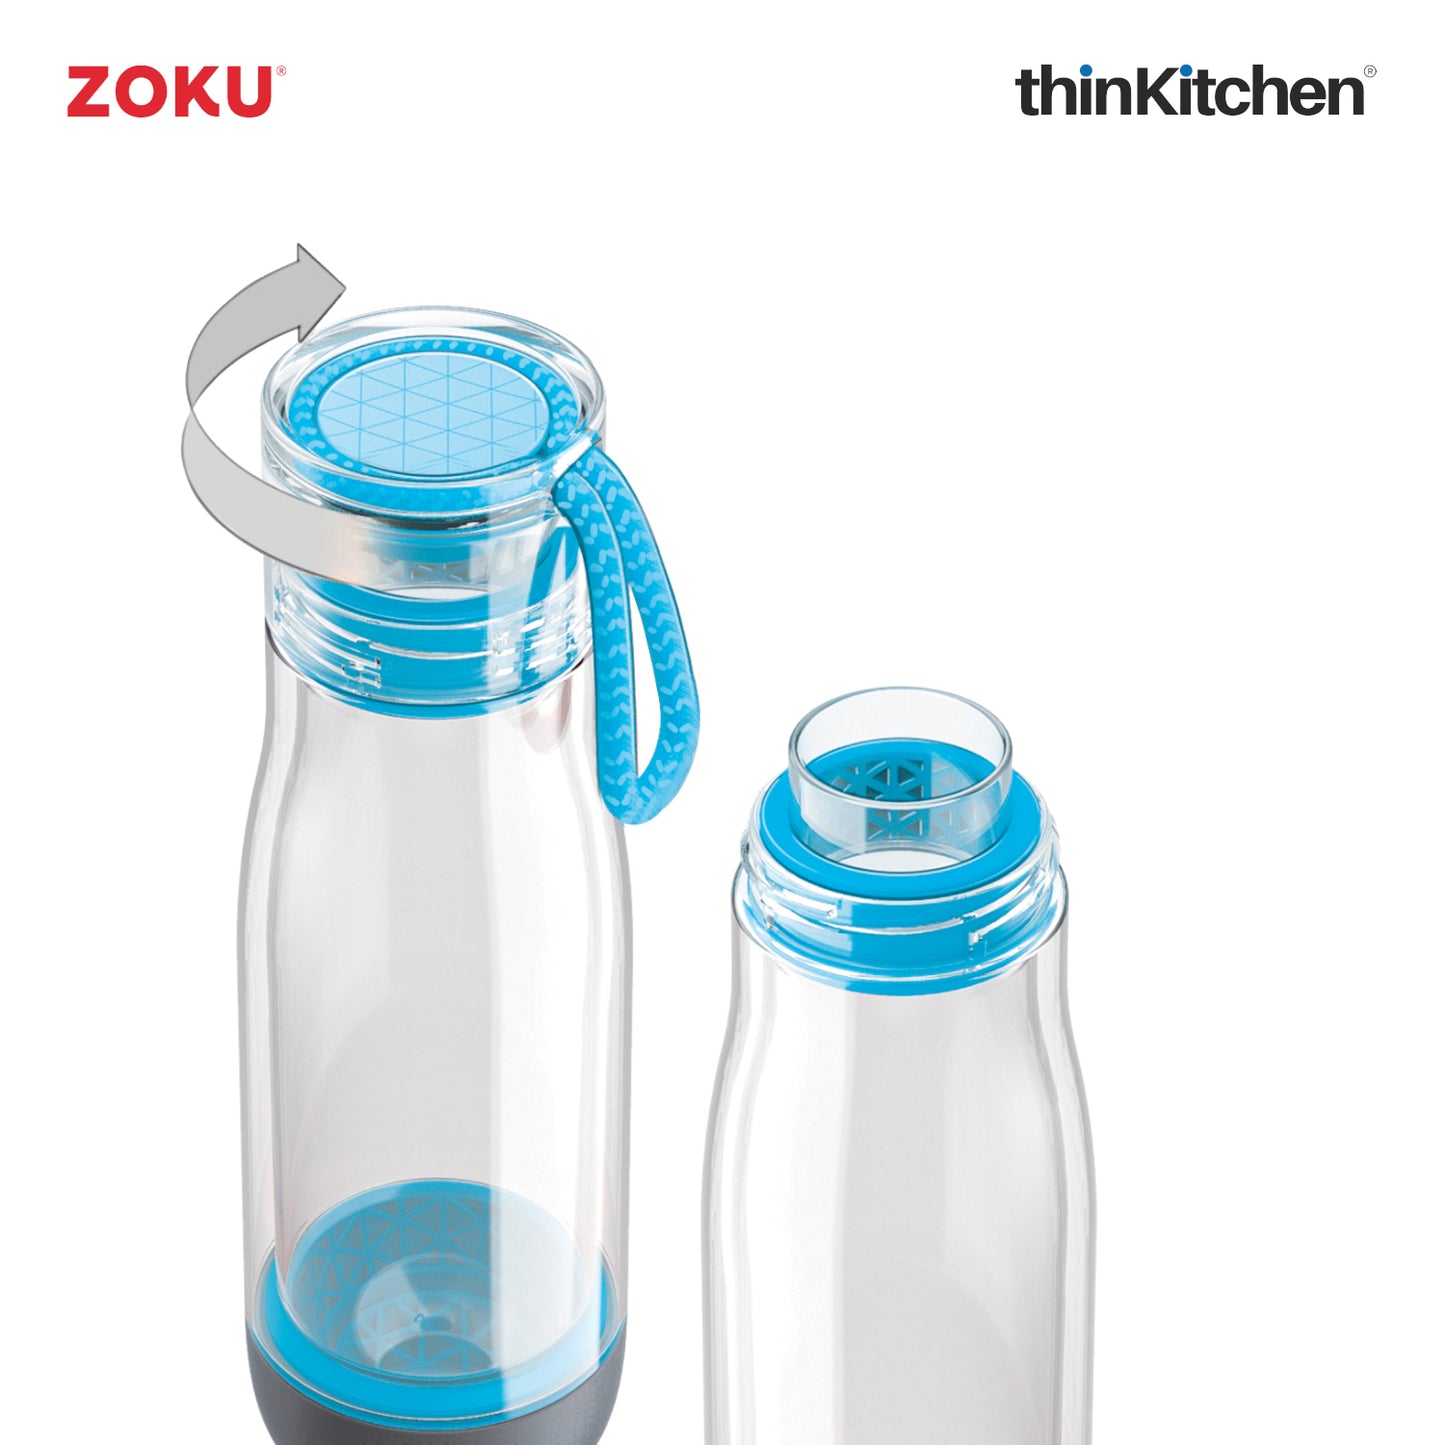 Zoku Teal Everyday Outer Core Bottle, 475ml